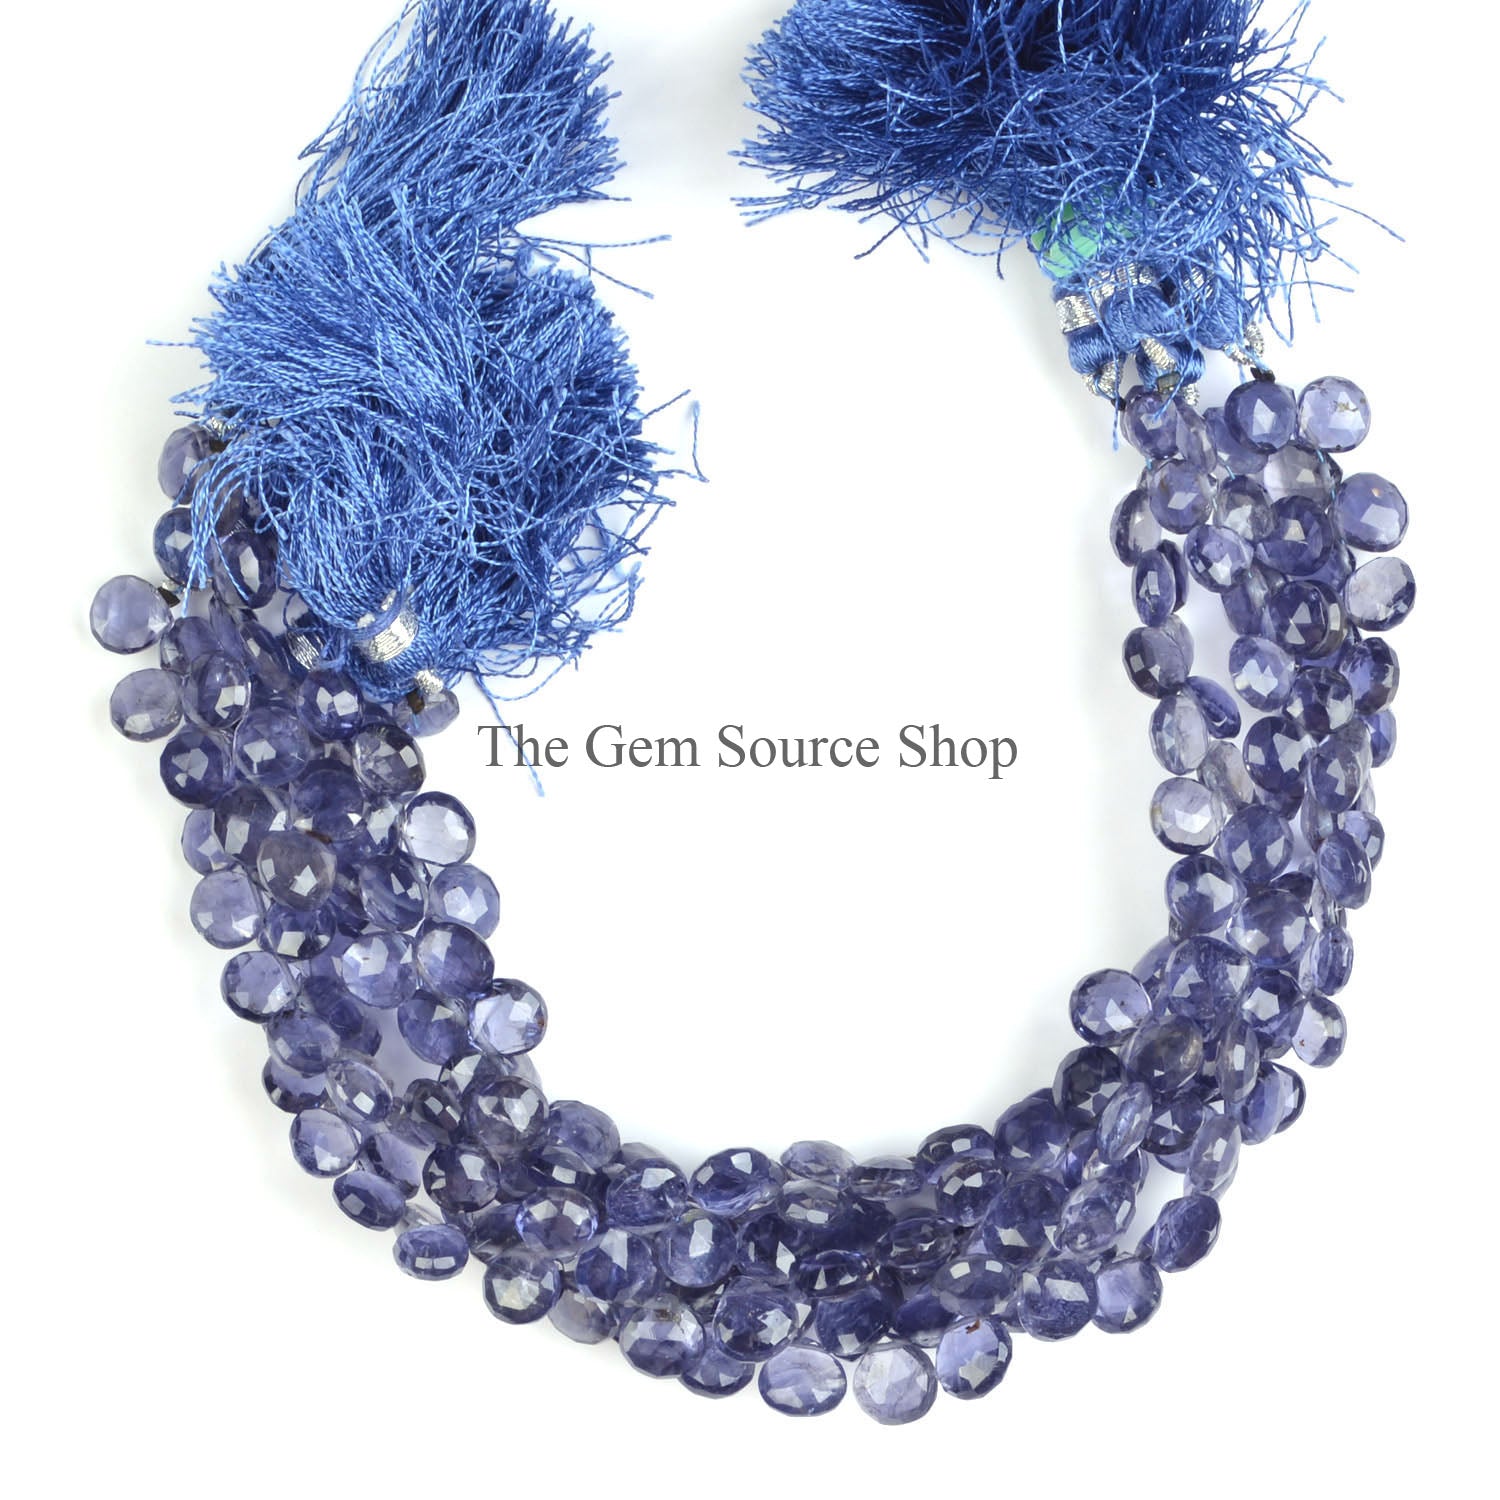 Iolite Faceted Beads, Iolite Heart Shape Beads, Heart Briolette Beads, Wholesale Gemstone Beads